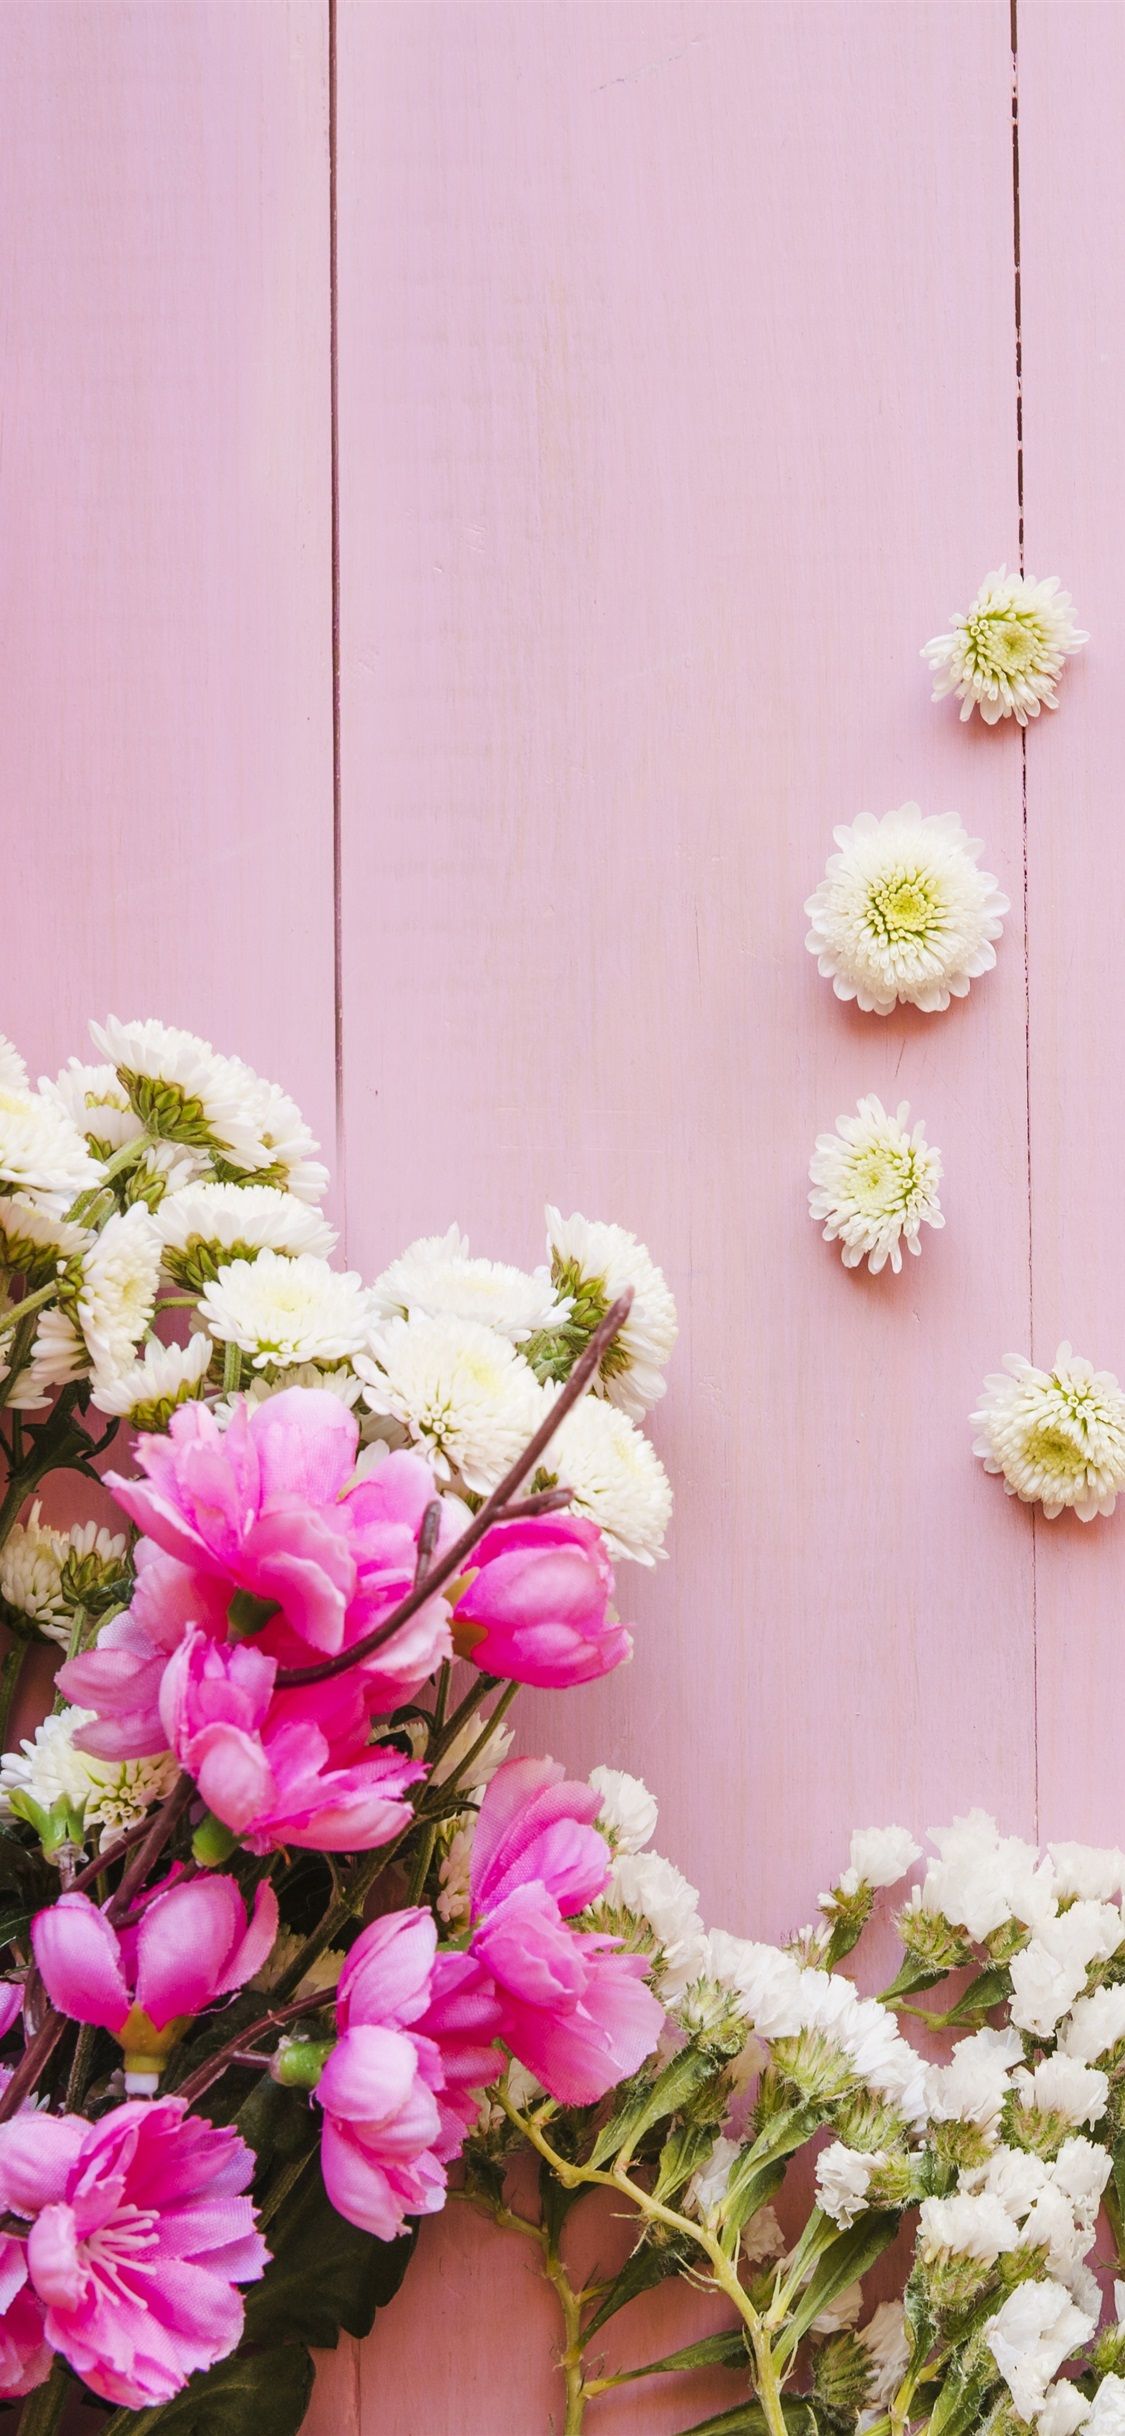 Pink And White Flowers, Wood Background 1125x2436 IPhone 11 Pro XS